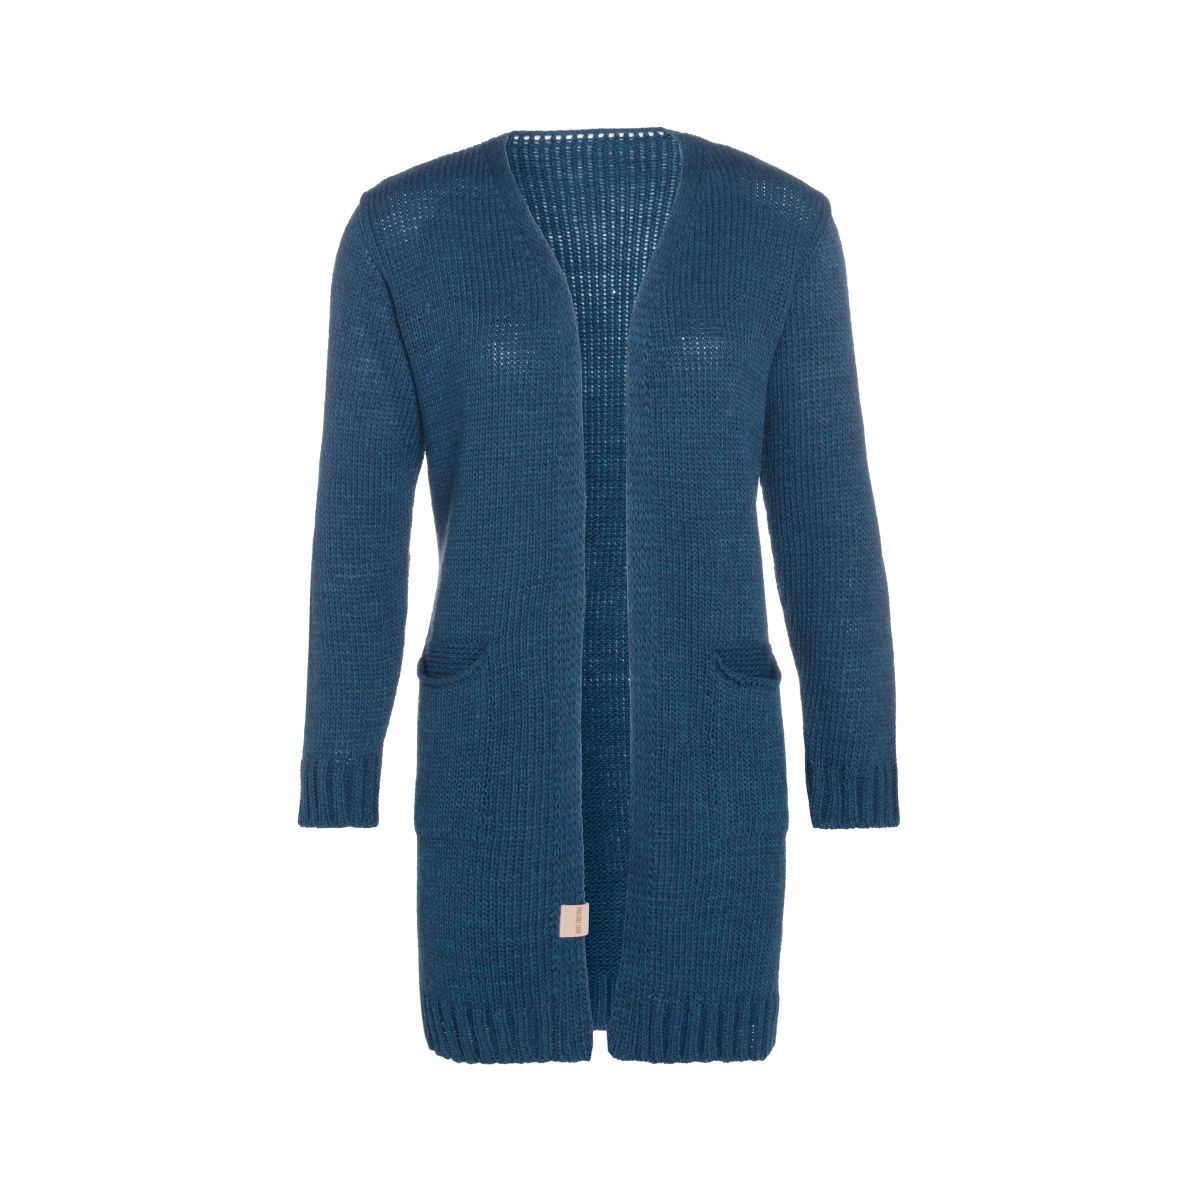 ruby knitted cardigan petrol 3638 with side pockets